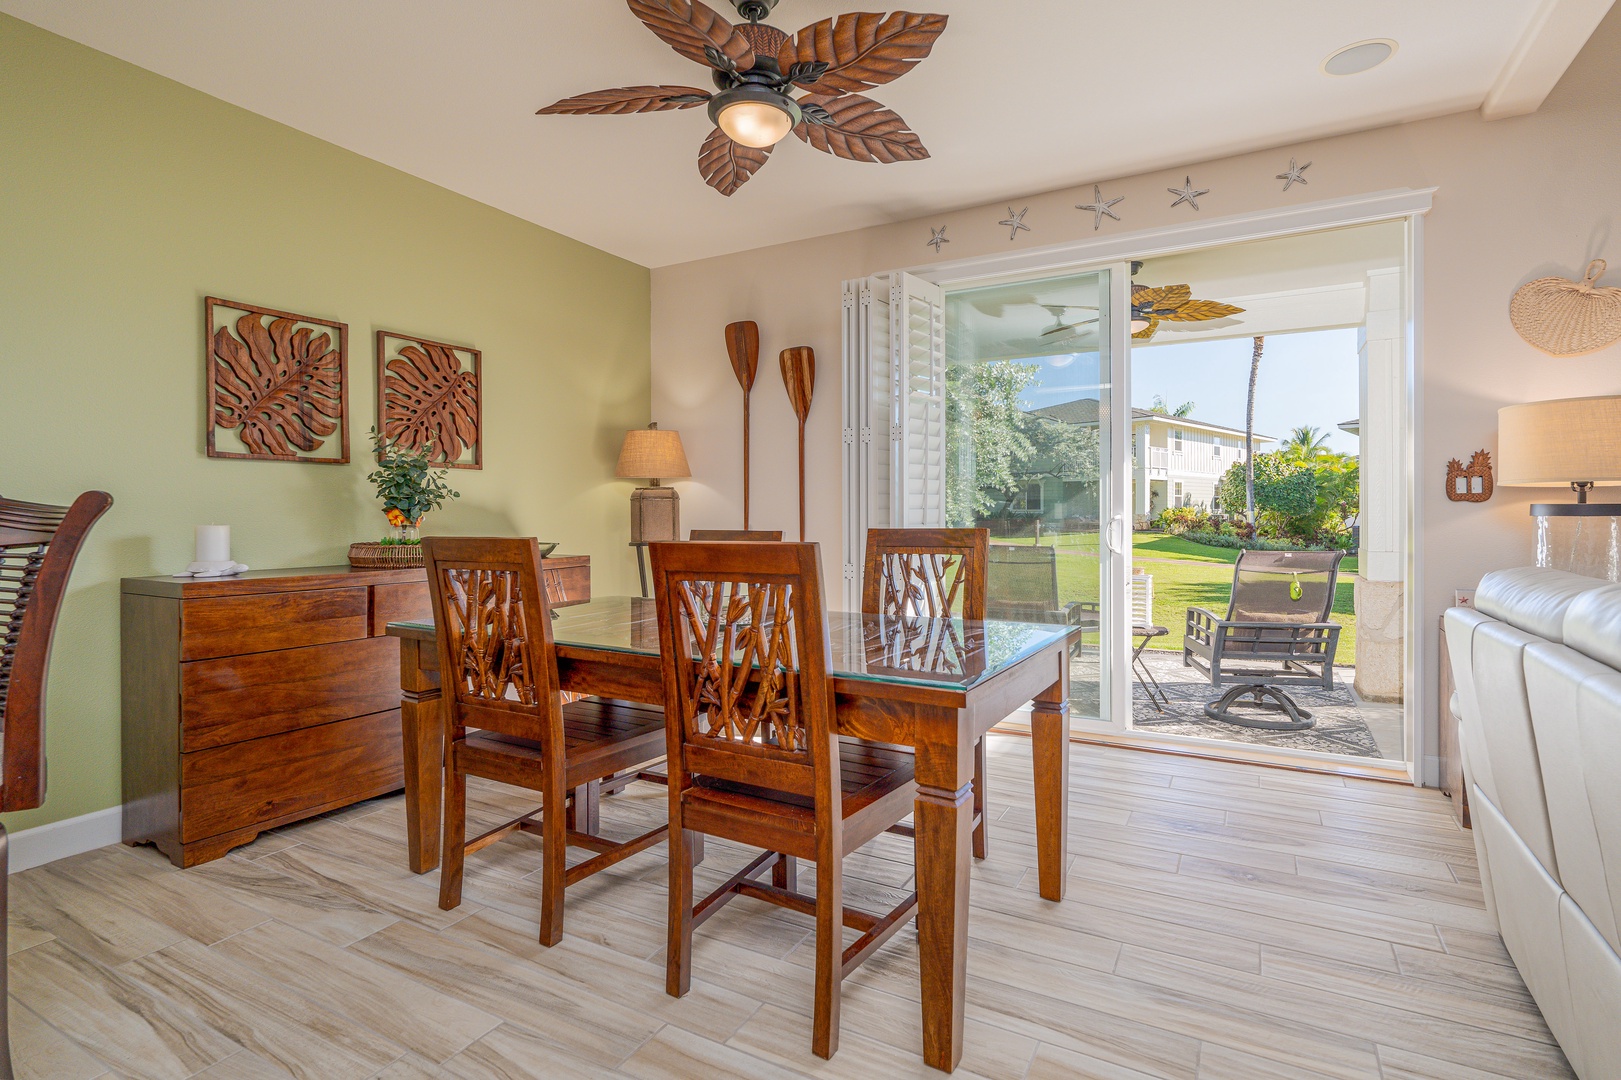 Kapolei Vacation Rentals, Ko Olina Kai 1097C - Open floorplan connecting the kitchen bar to the cozy living space, perfect for intimate family gatherings.